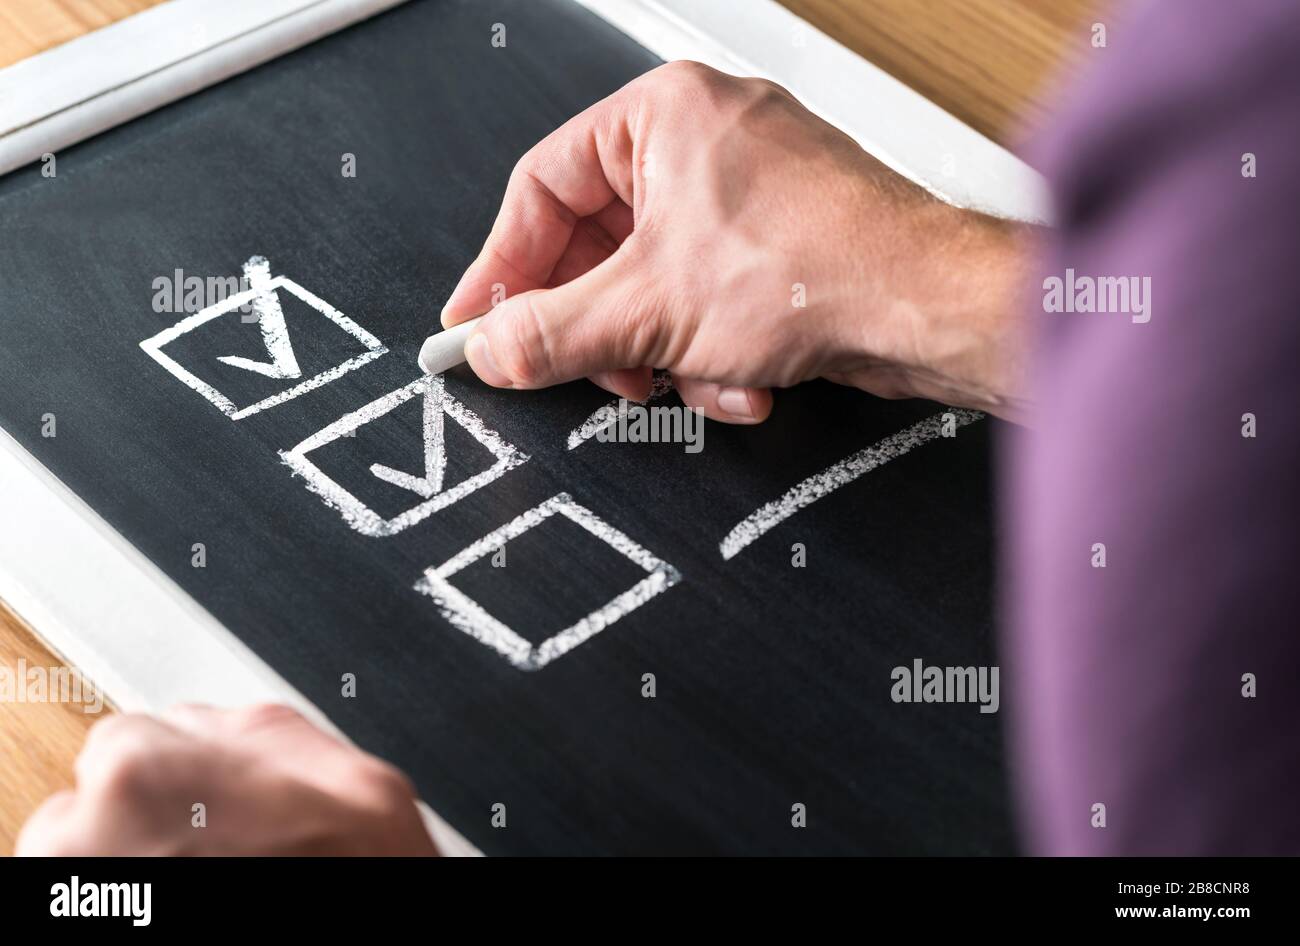 Man writing checkmark to checklist on blackboard. Document of finished work and completed tasks on chalkboard. Check list for planning. Stock Photo